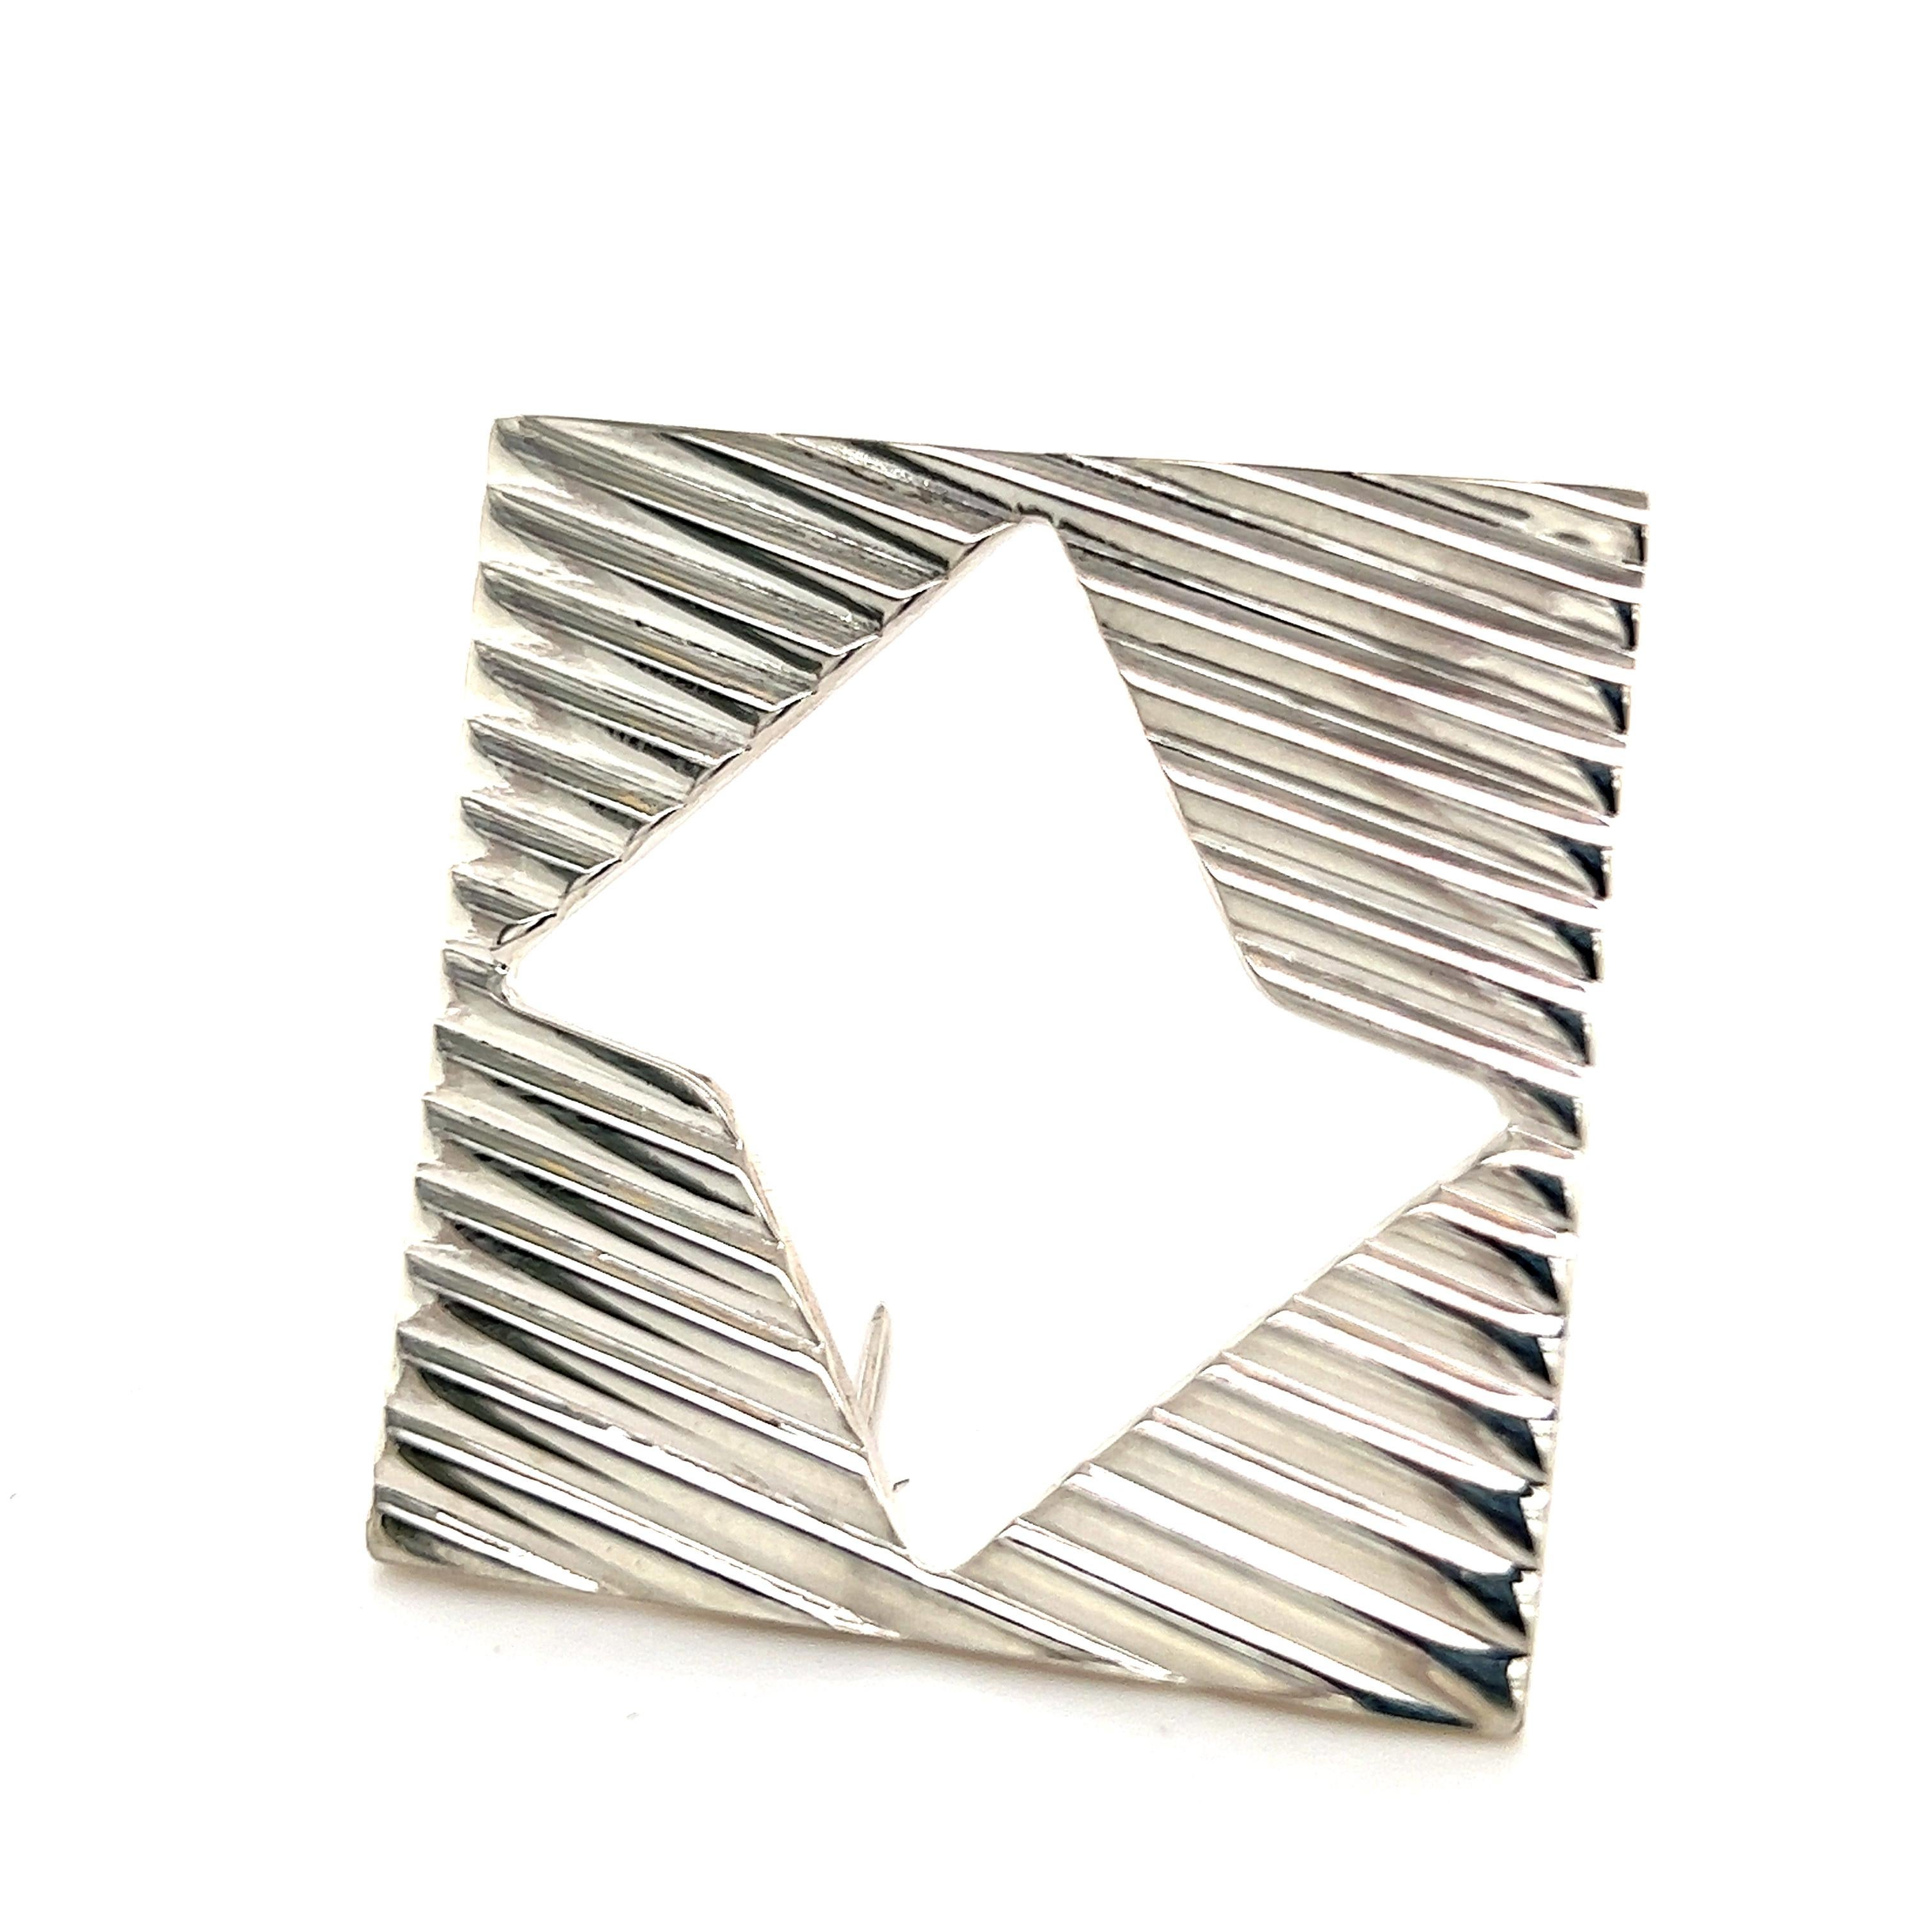 Tiffany & Co Estate Abstract Brooch Sterling Silver 14.8 Grams TIF221
 
TRUSTED SELLER SINCE 2002
 
PLEASE SEE OUR HUNDREDS OF POSITIVE FEEDBACKS FROM OUR CLIENTS!!
 
FREE SHIPPING!!

DETAILS
Style: Abstract
Weight: 14.8 Grams
Metal: Sterling